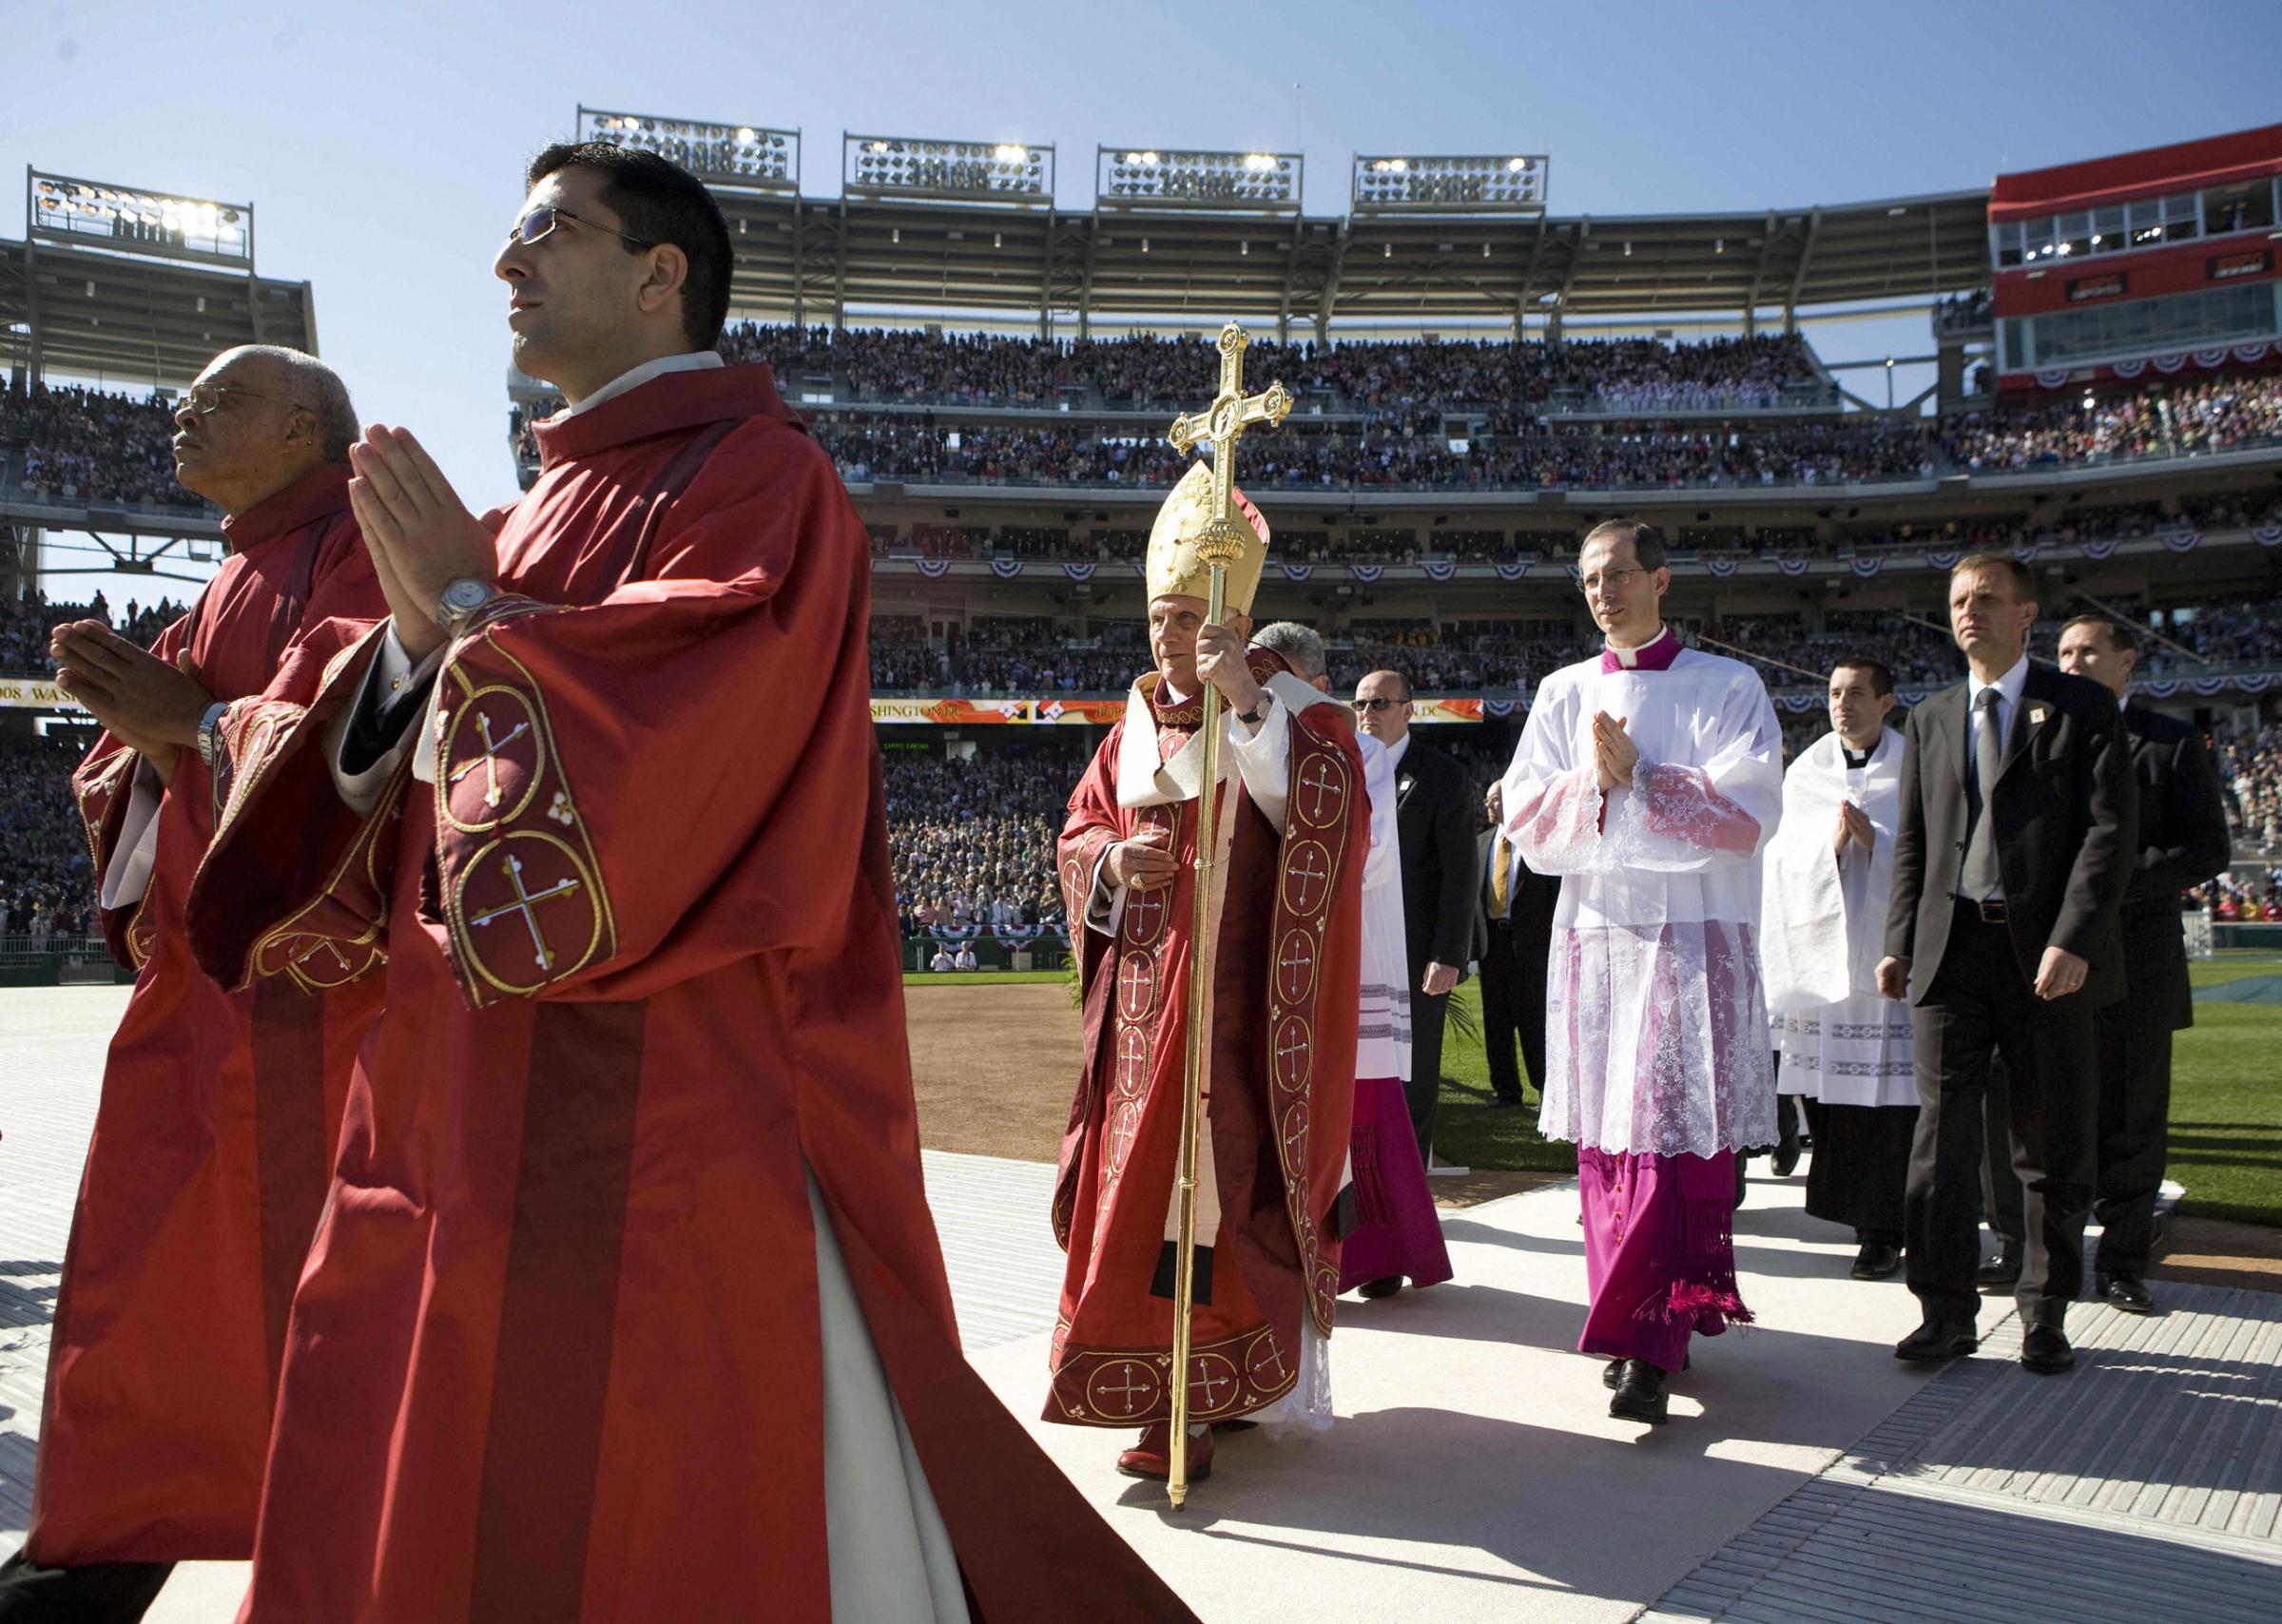 Pope Benedict XVI arrives to celebrate Mass April 17, 2008 at Nationals Park in Washington, DC.